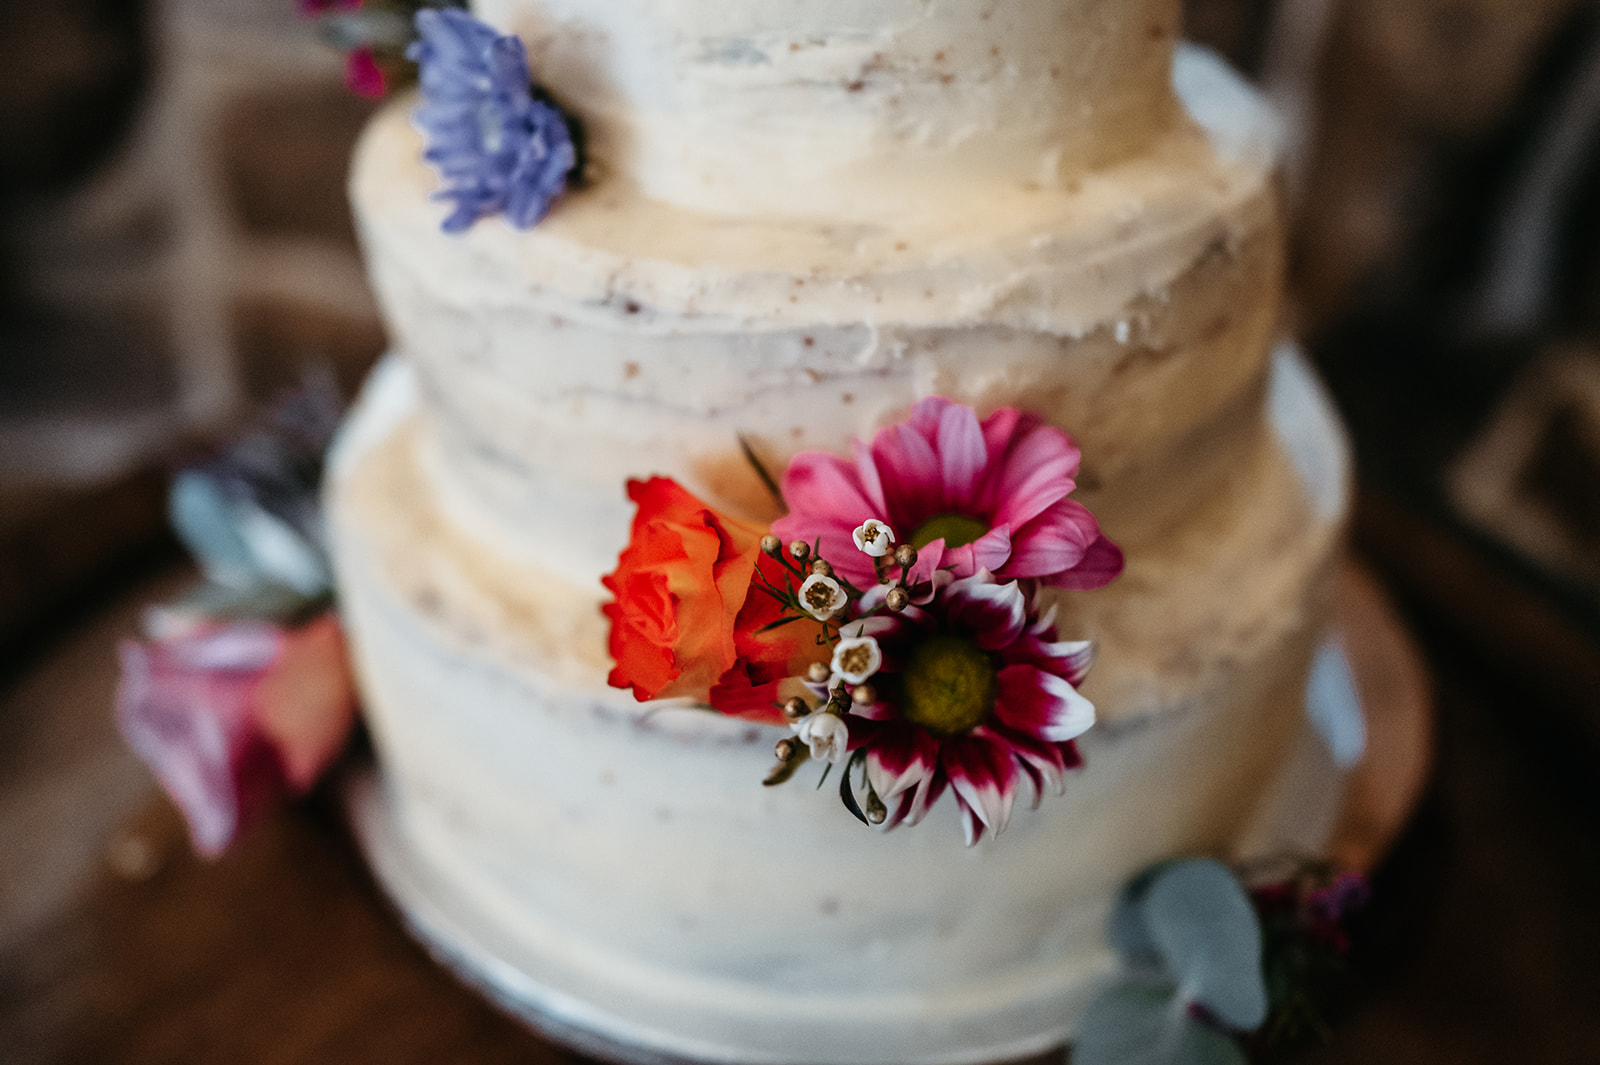 A beautifully crafted wedding cake with intricate icing designs